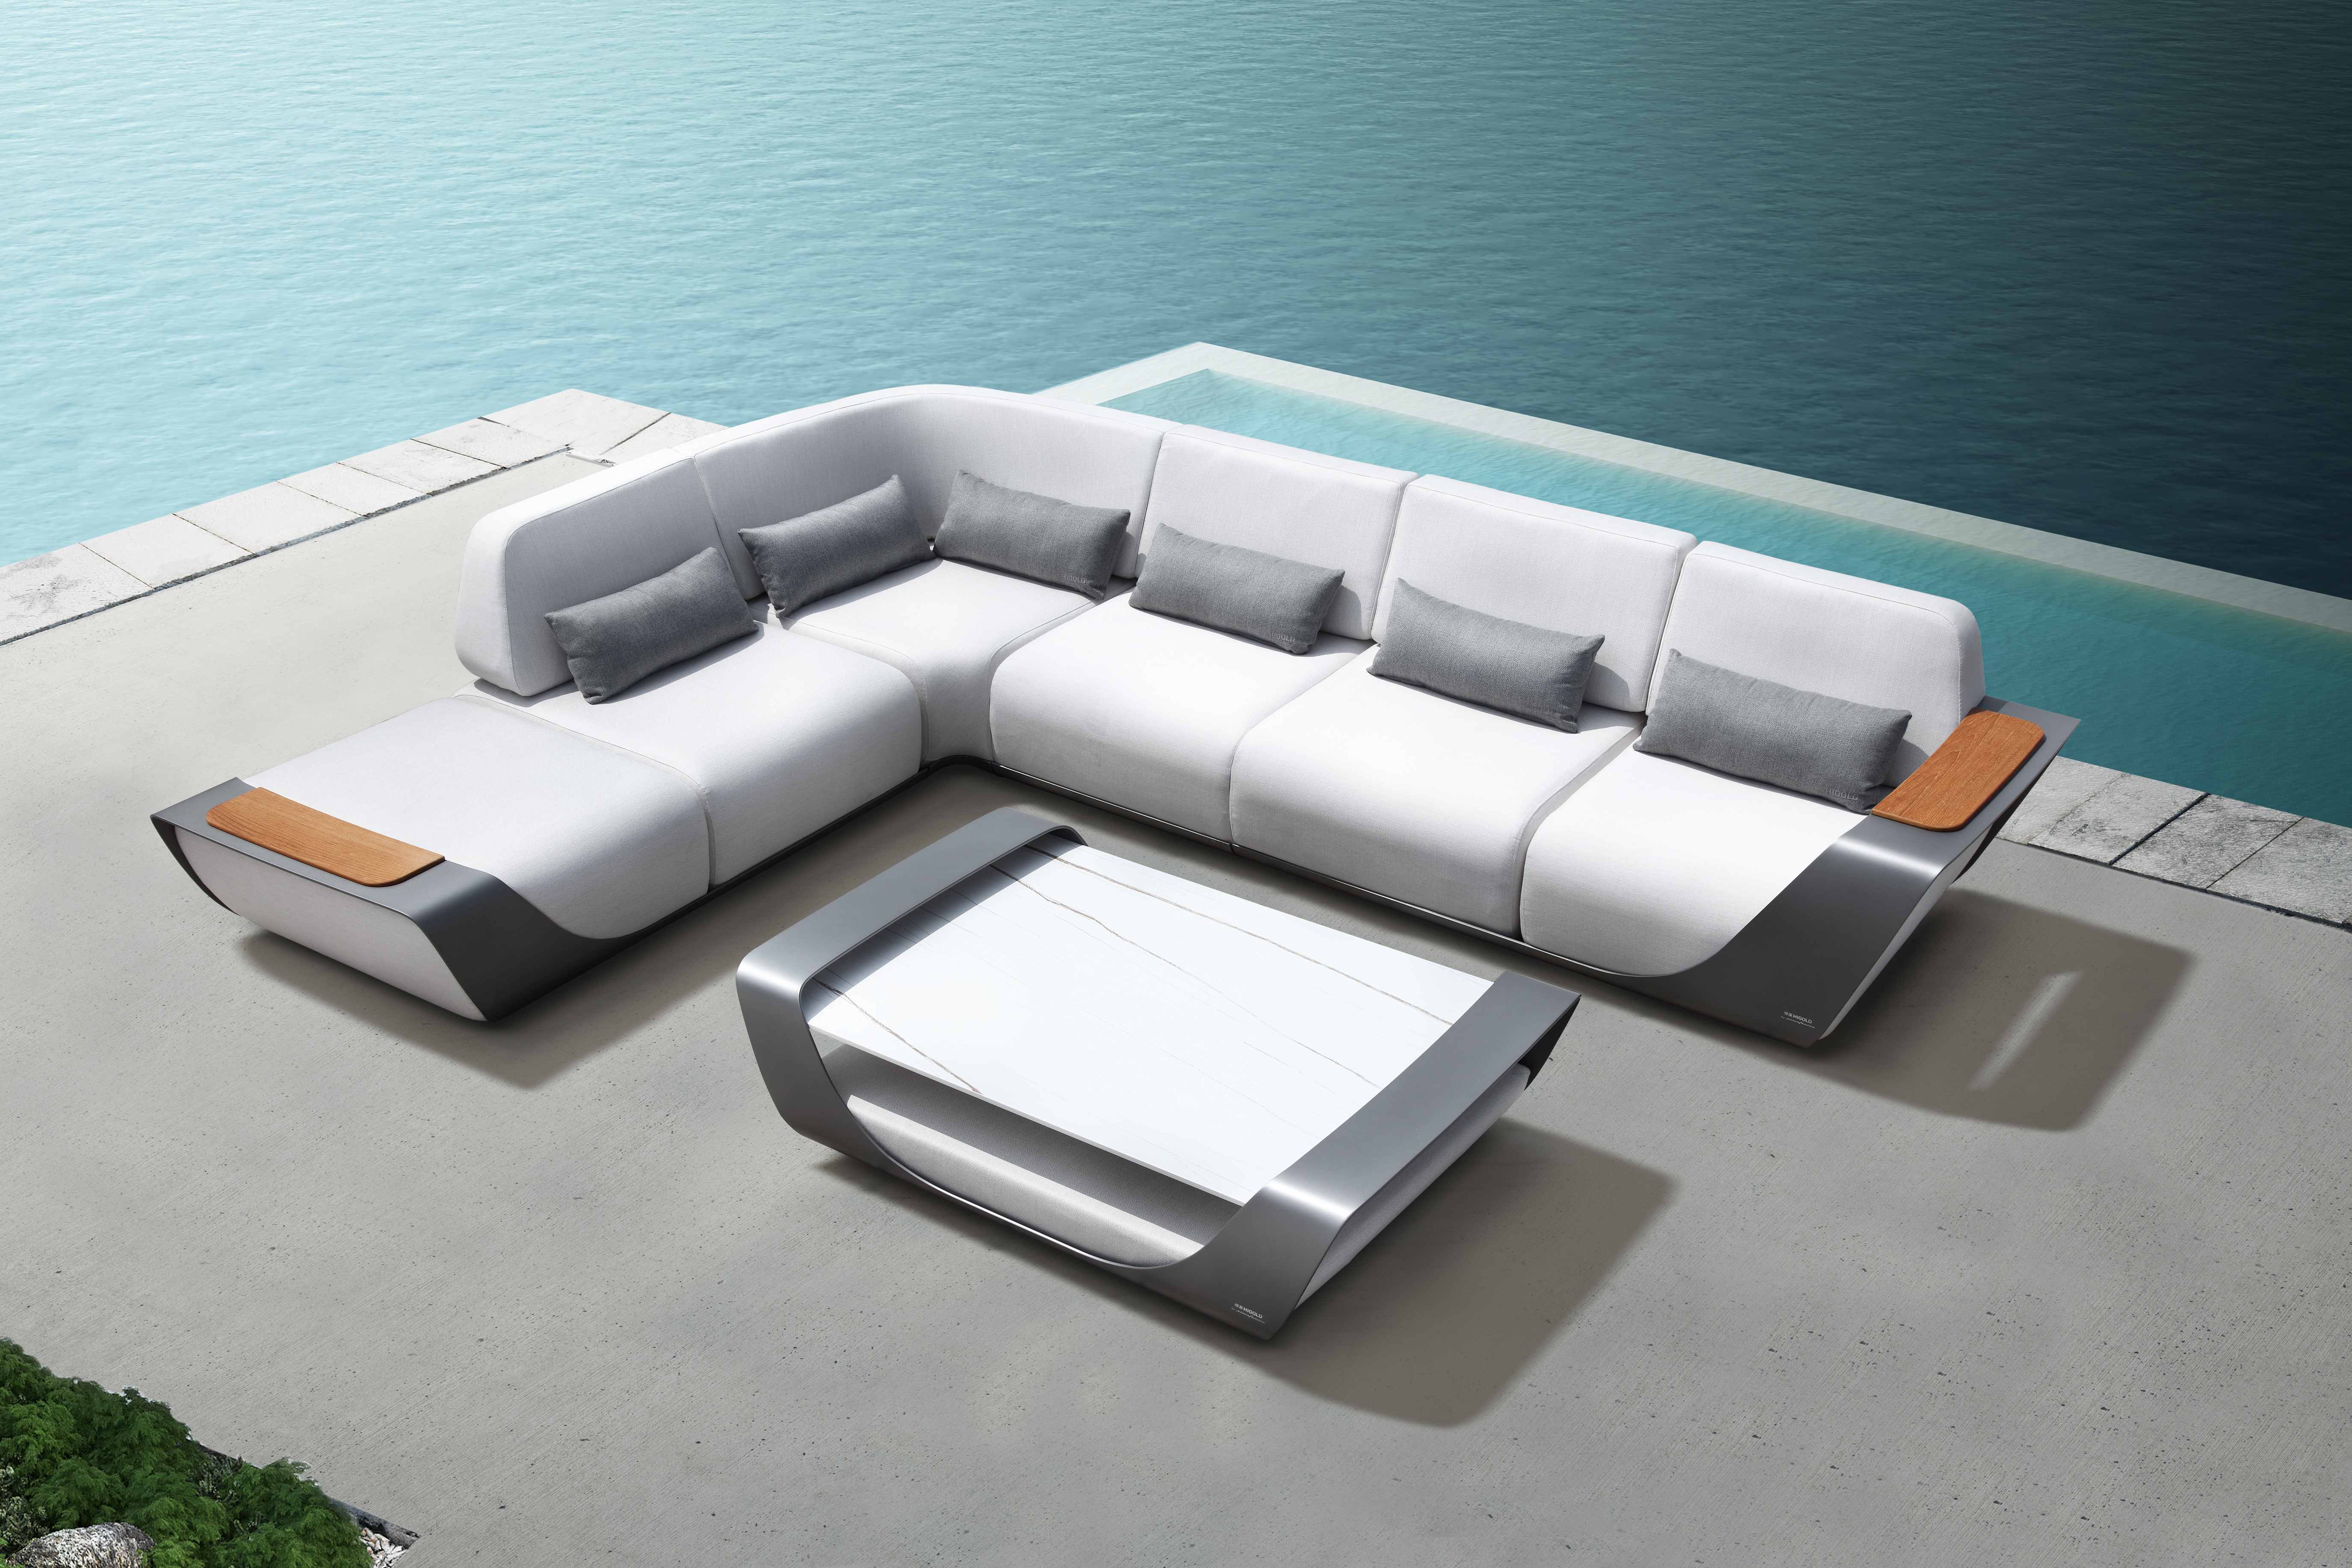 Onda white outdoor sectional sofa with high back